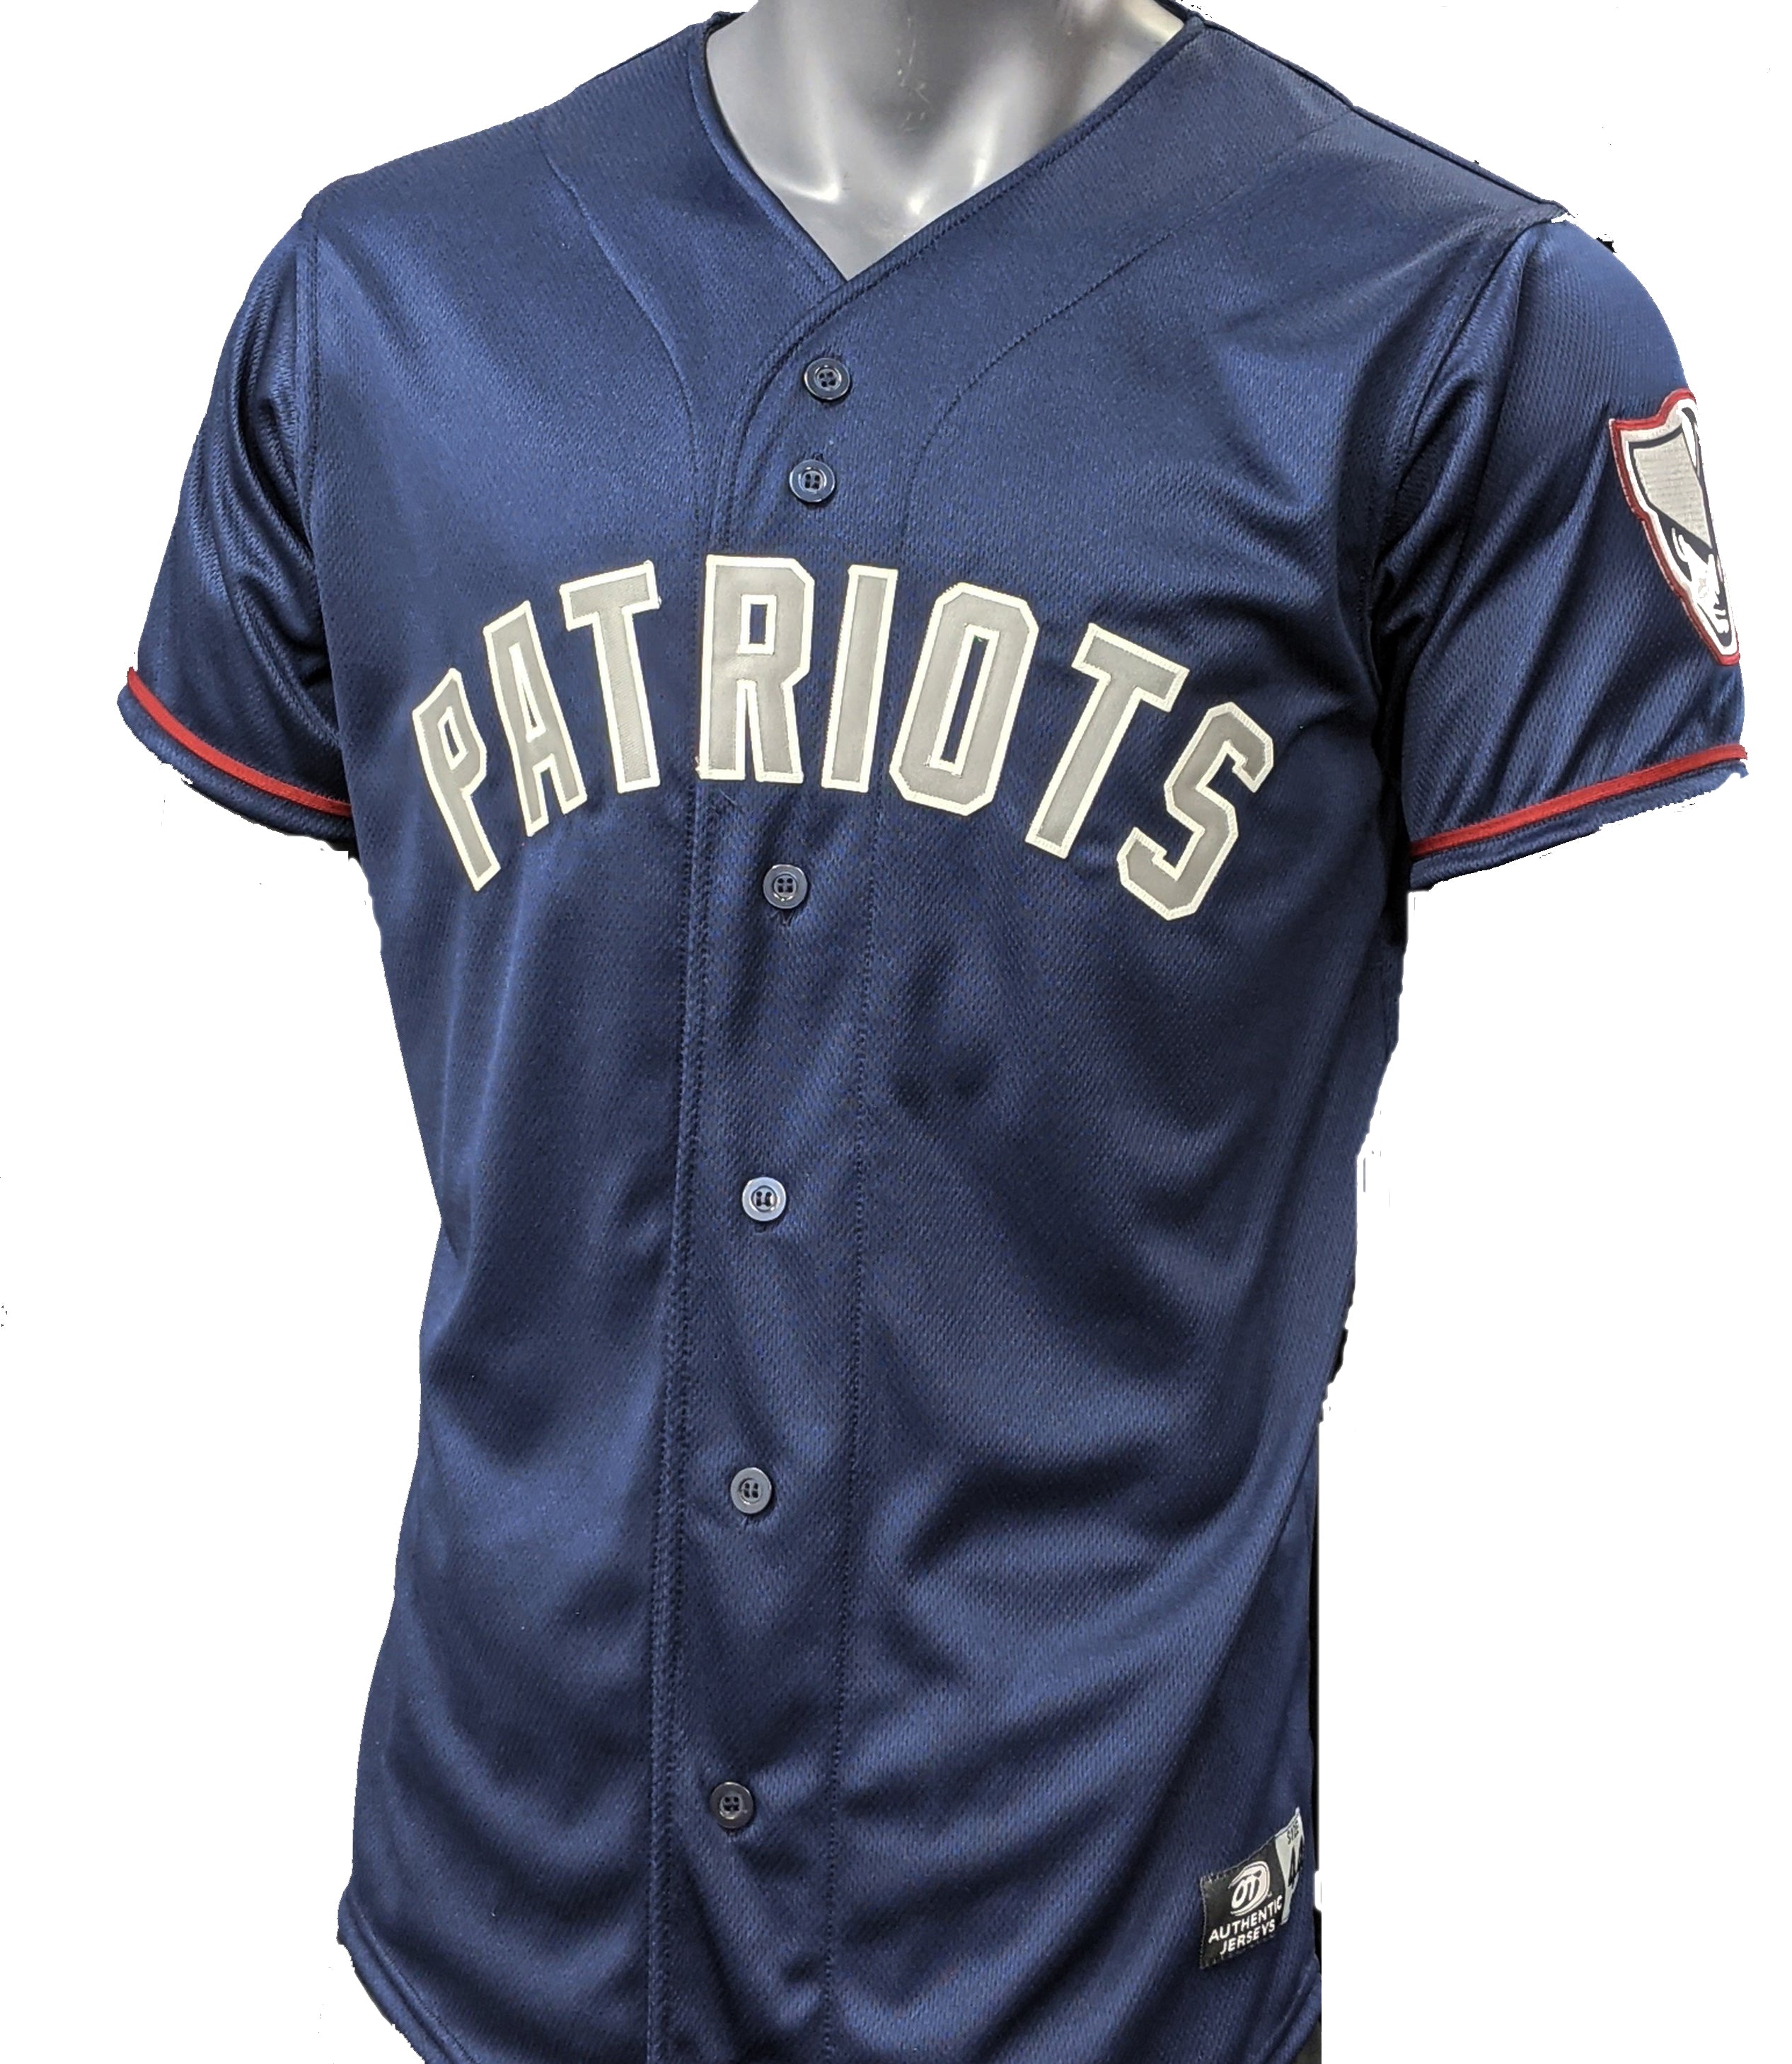 OT Sports Somerset Patriots Official Youth Alternate Jersey Replica YLG / No